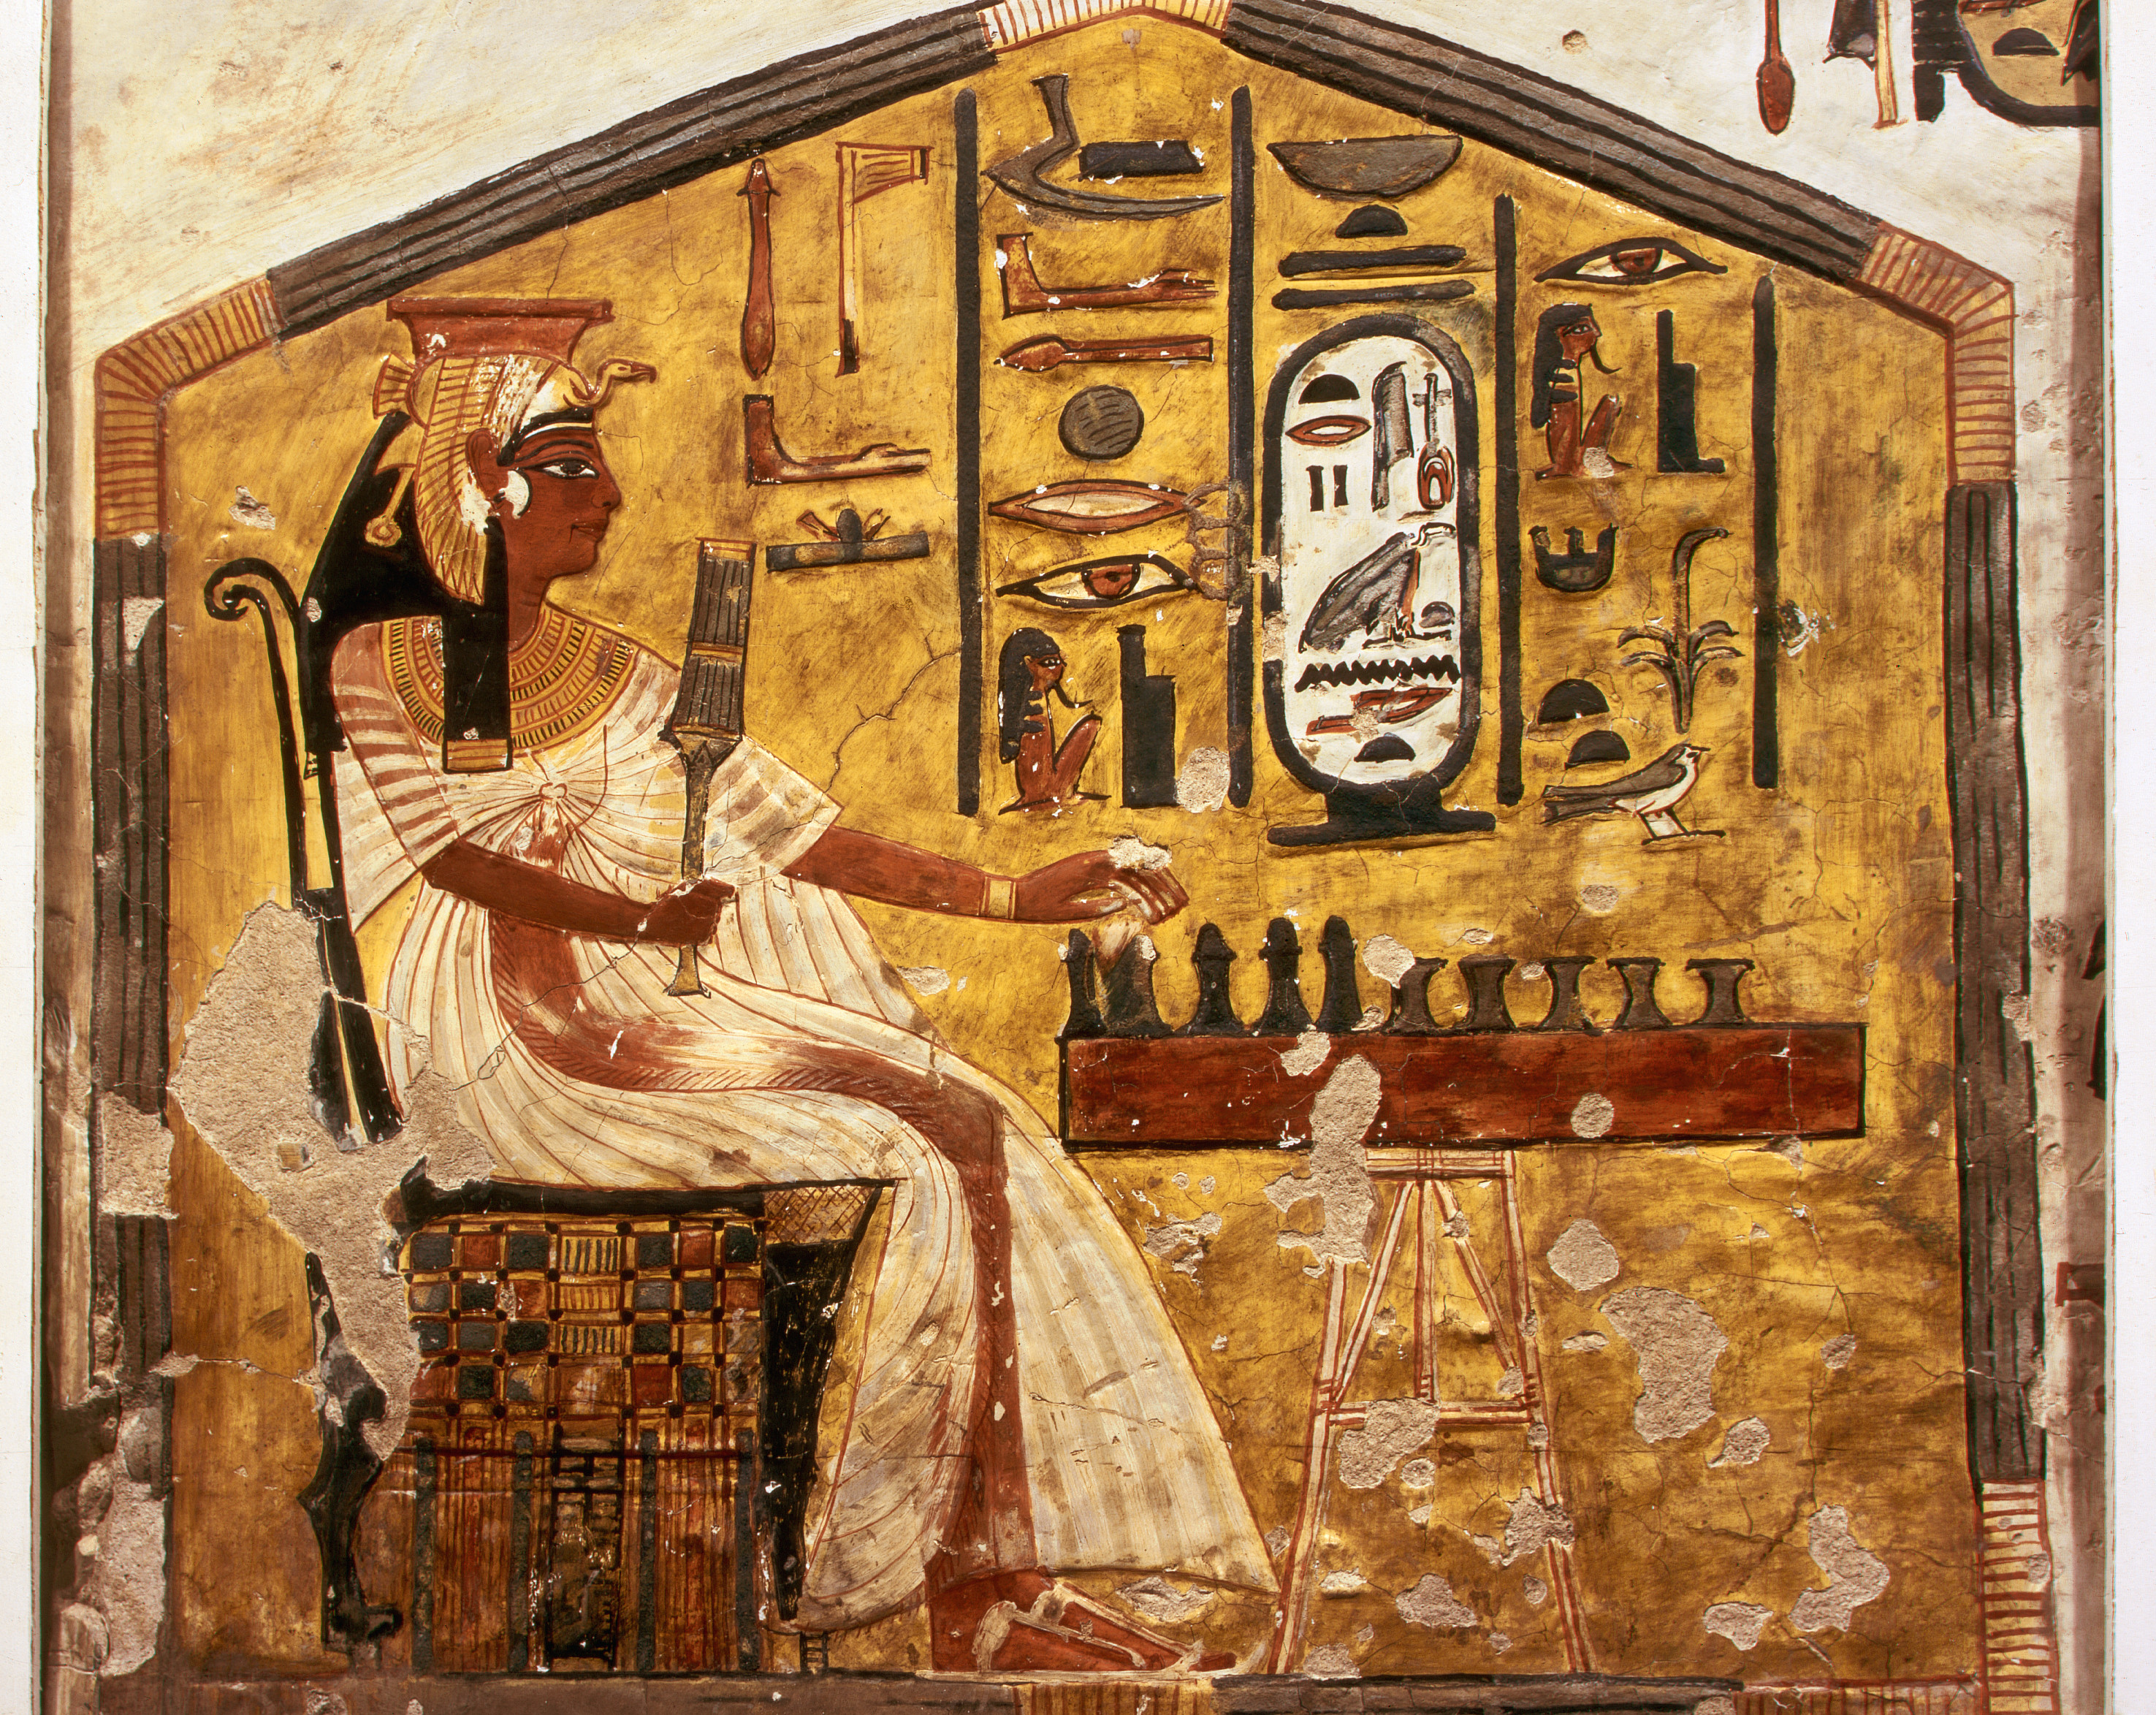 Queen Playing Senet by Unknown Artist - c. 1255 BC Tomb of Nefertari